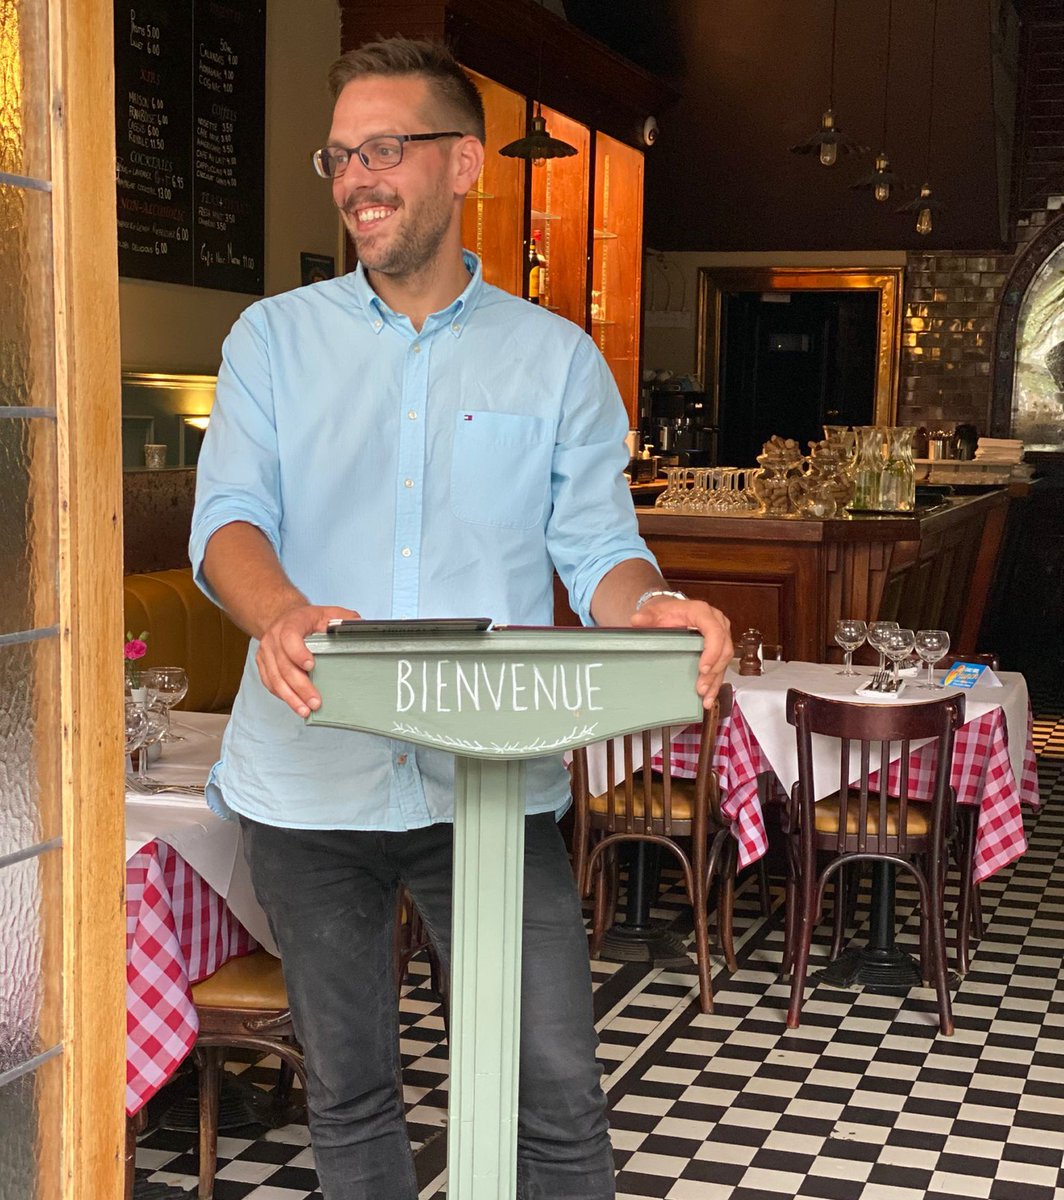 Have you had the pleasure of meeting Joao yet? If not then visit us soon and say hi 😄 Joao's recently joined our management team and complements Le Petit Citron like frites complement steak! #meettheteam #frenchfoodlondon